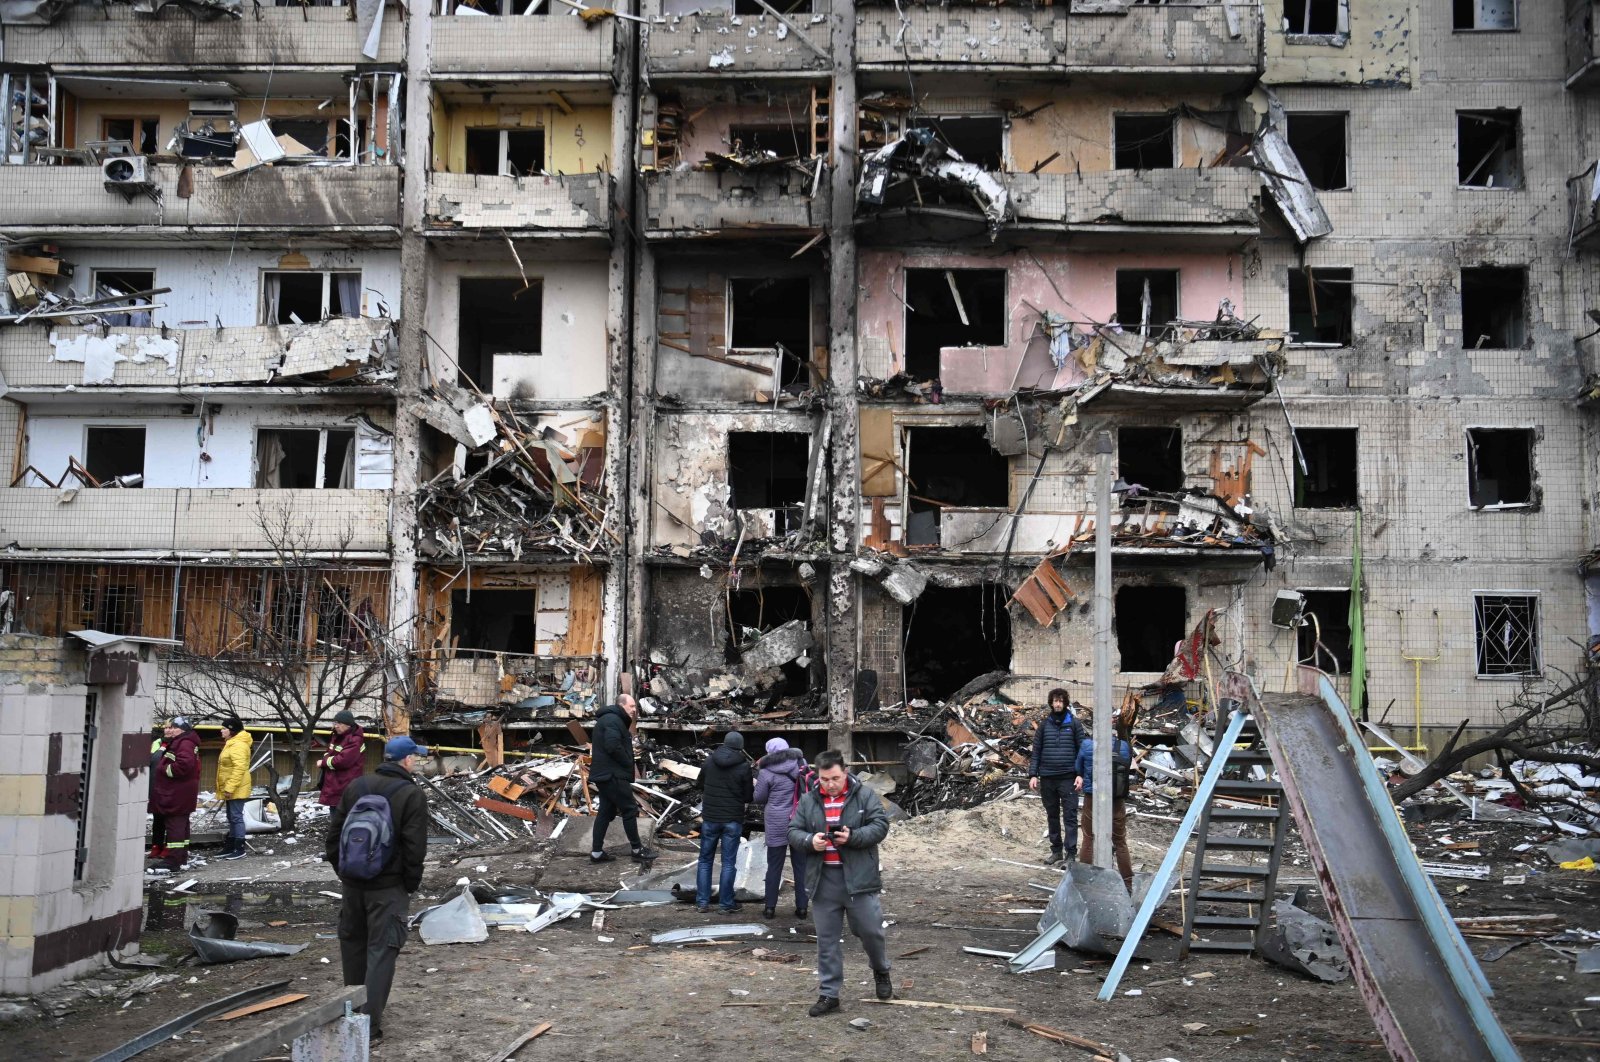 People gather in front of a damaged residential building on Koshytsa Street in a suburb of Kyiv, Ukraine, Feb. 25, 2022. (AFP Photo)